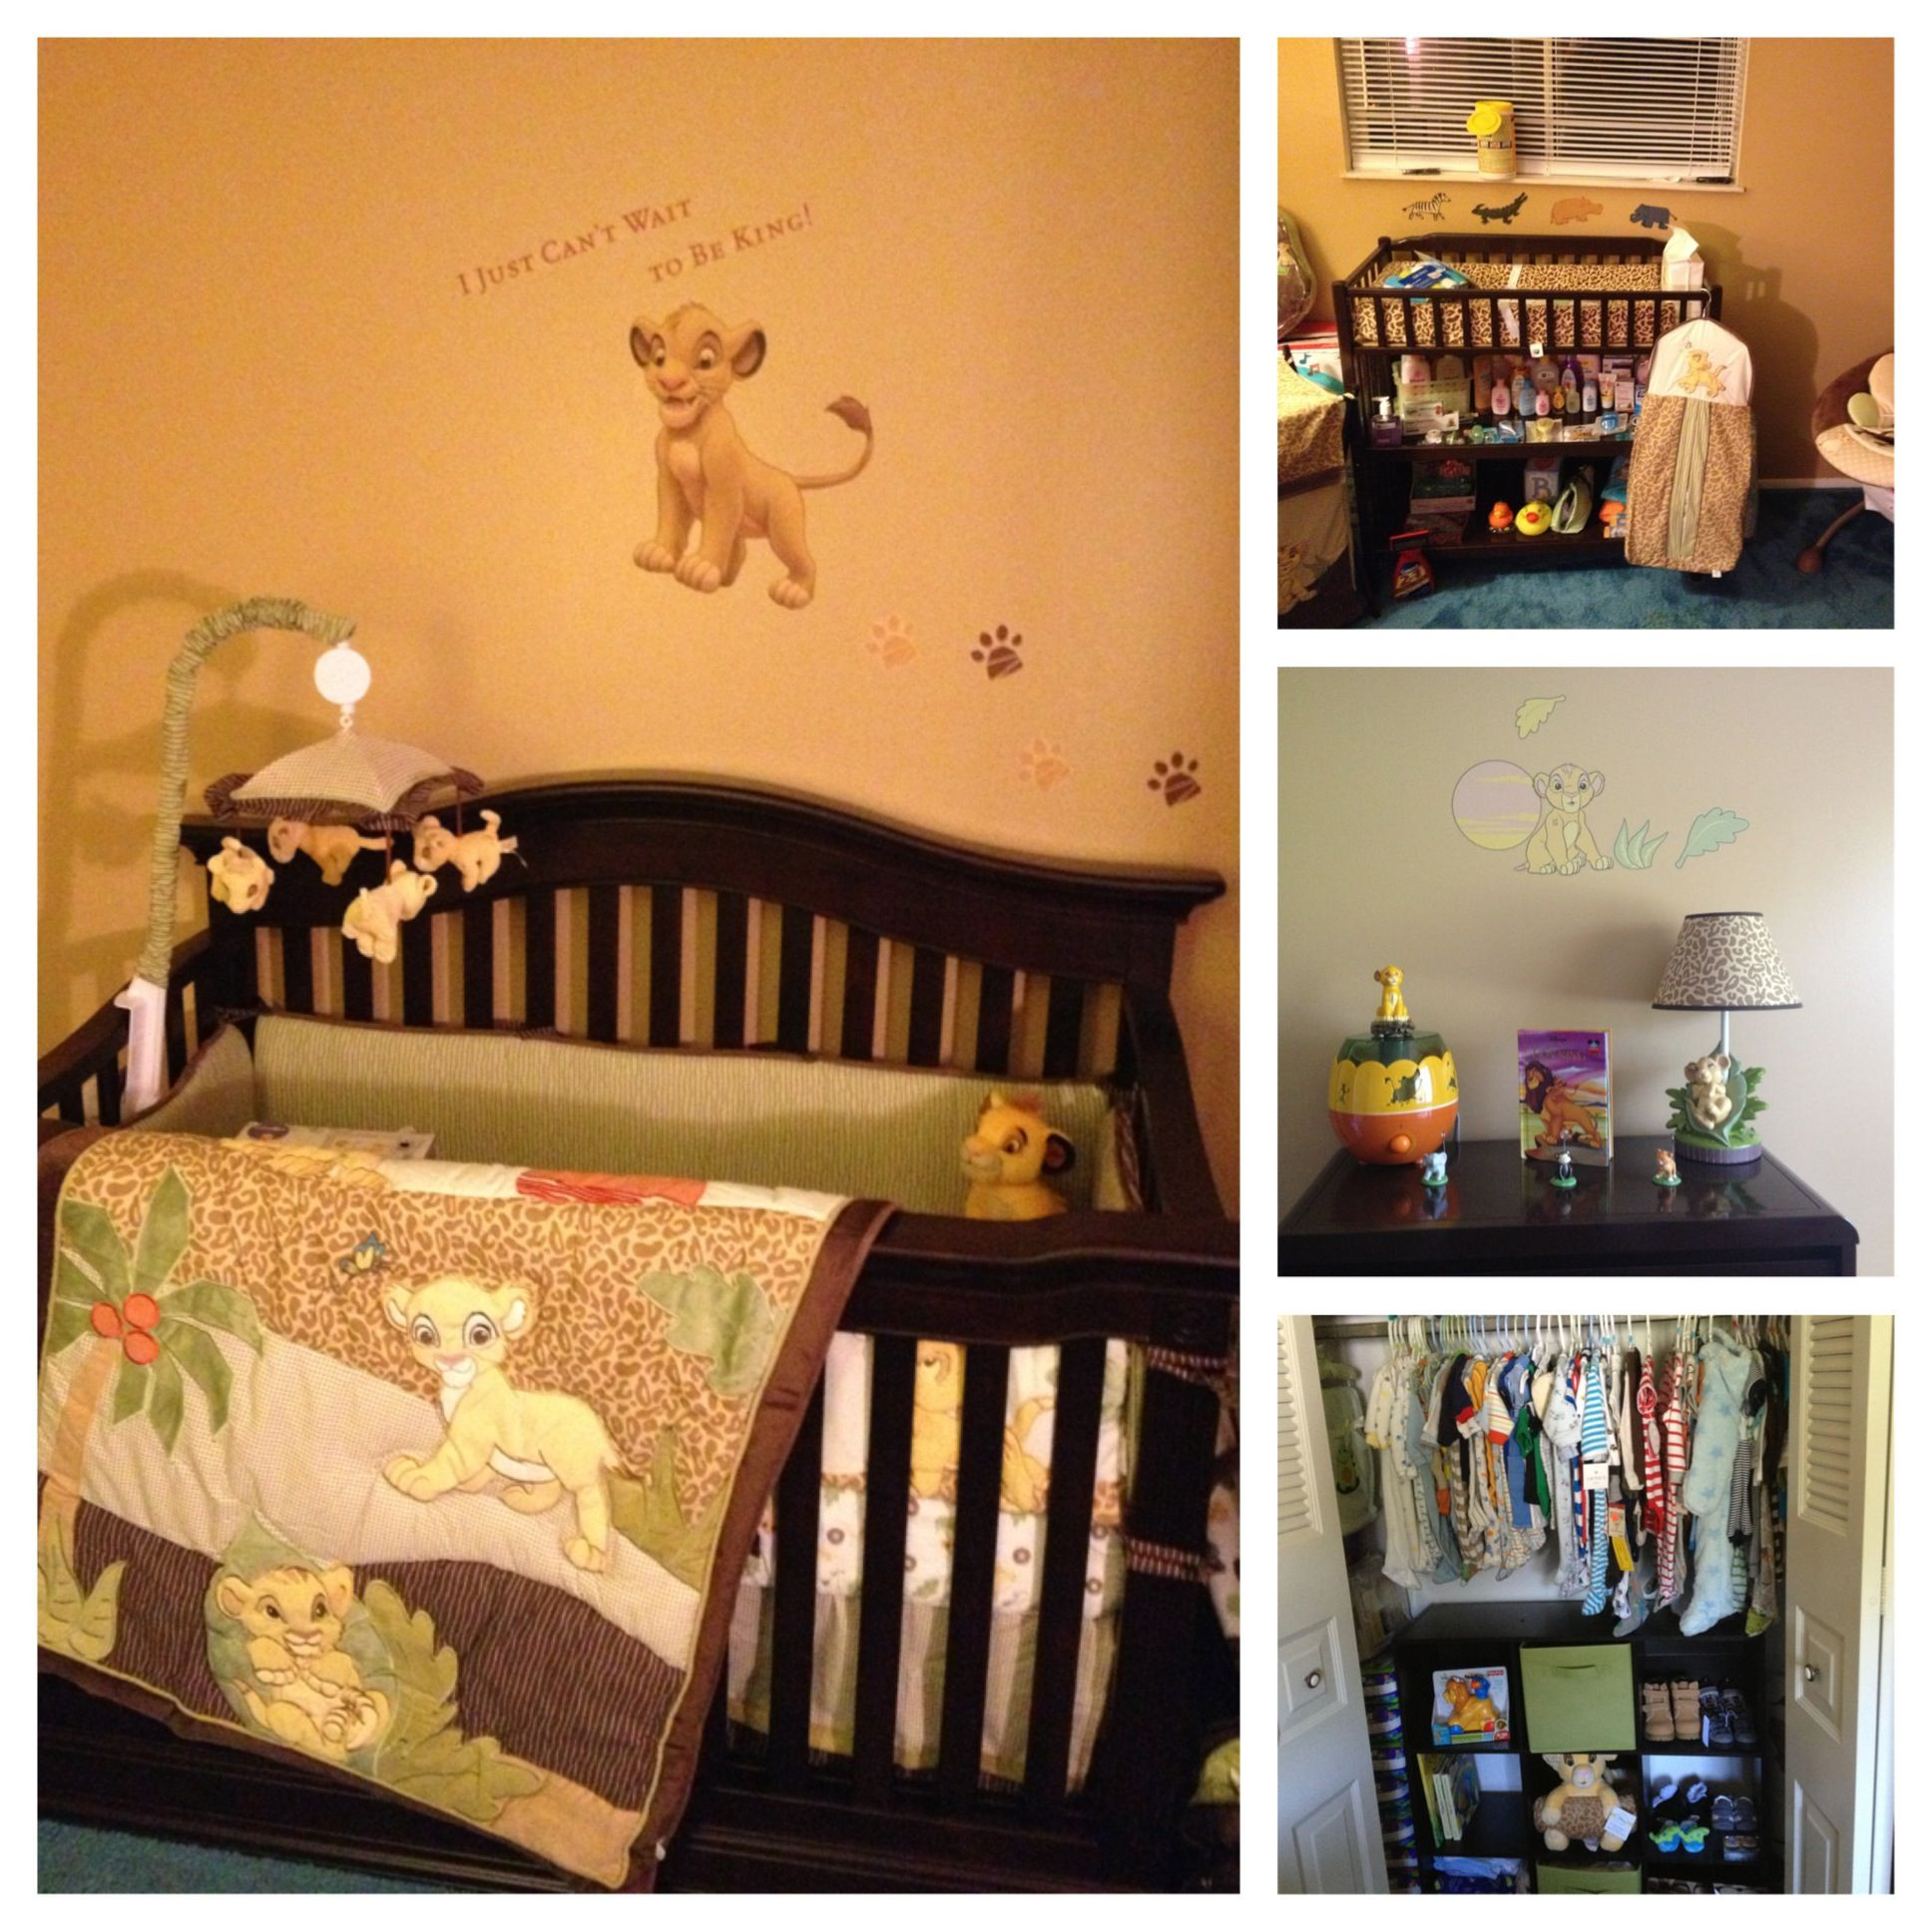 Lion King Baby Room Decor
 My baby boys lion king room